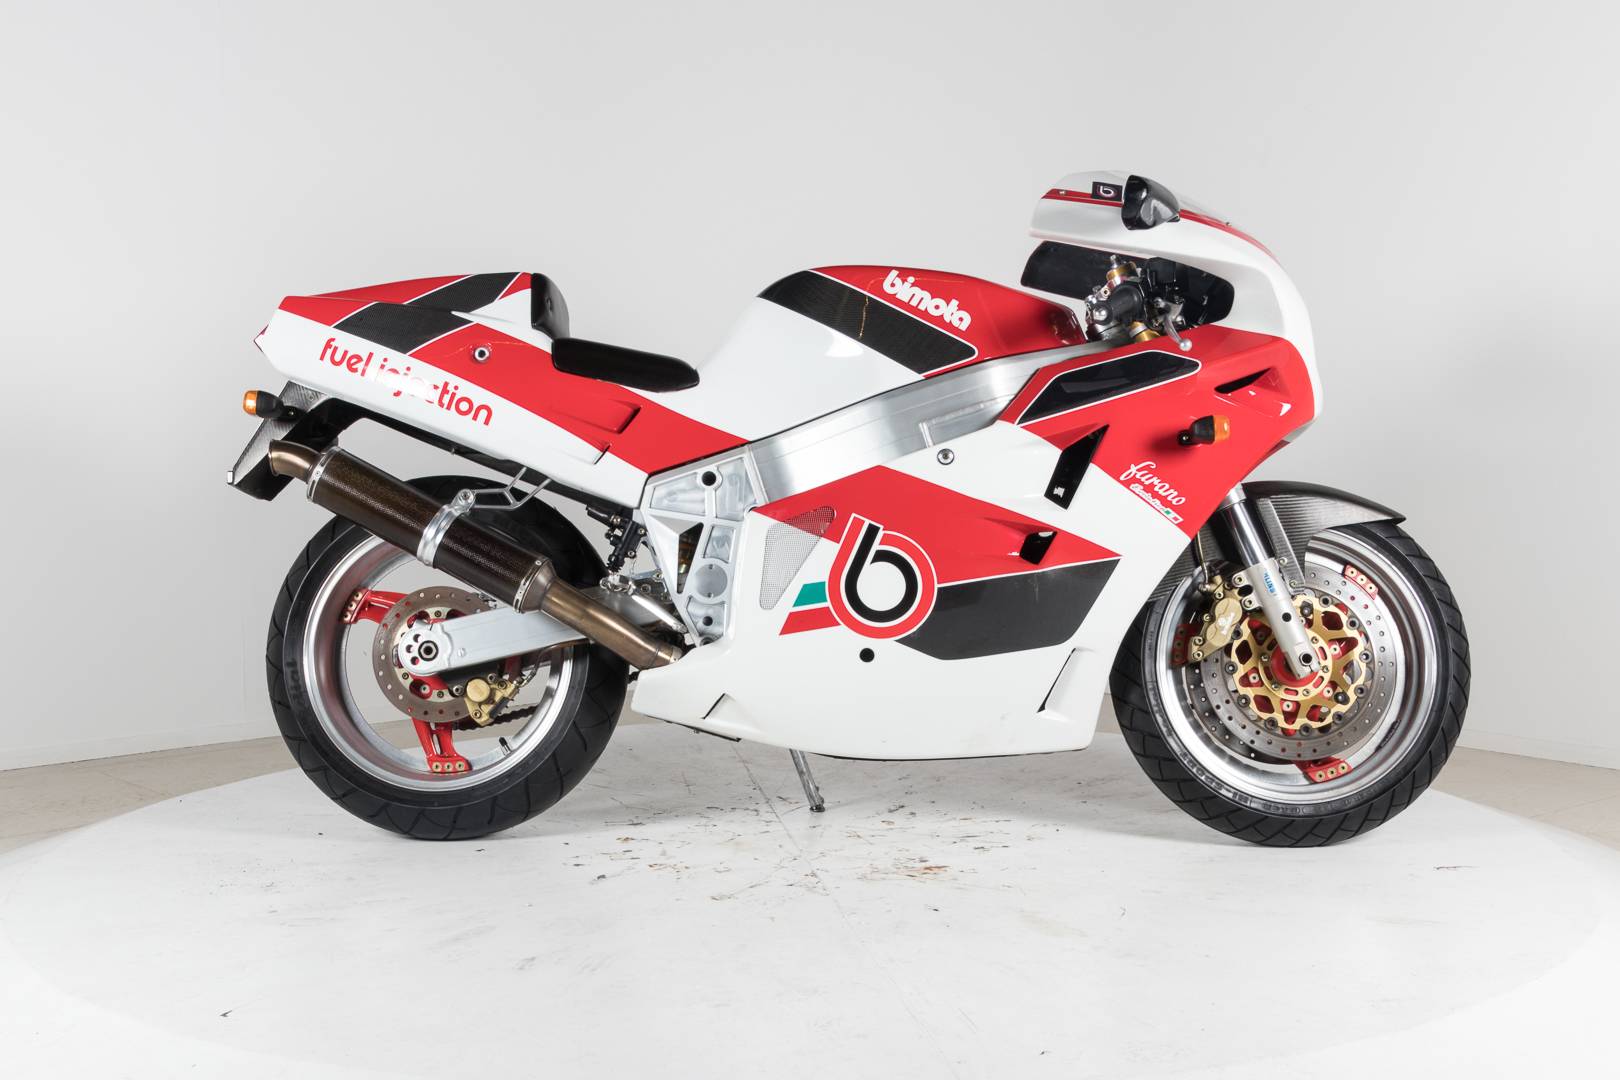 For Sale: Bimota YB8 Furano (1992) offered for AUD 32,345